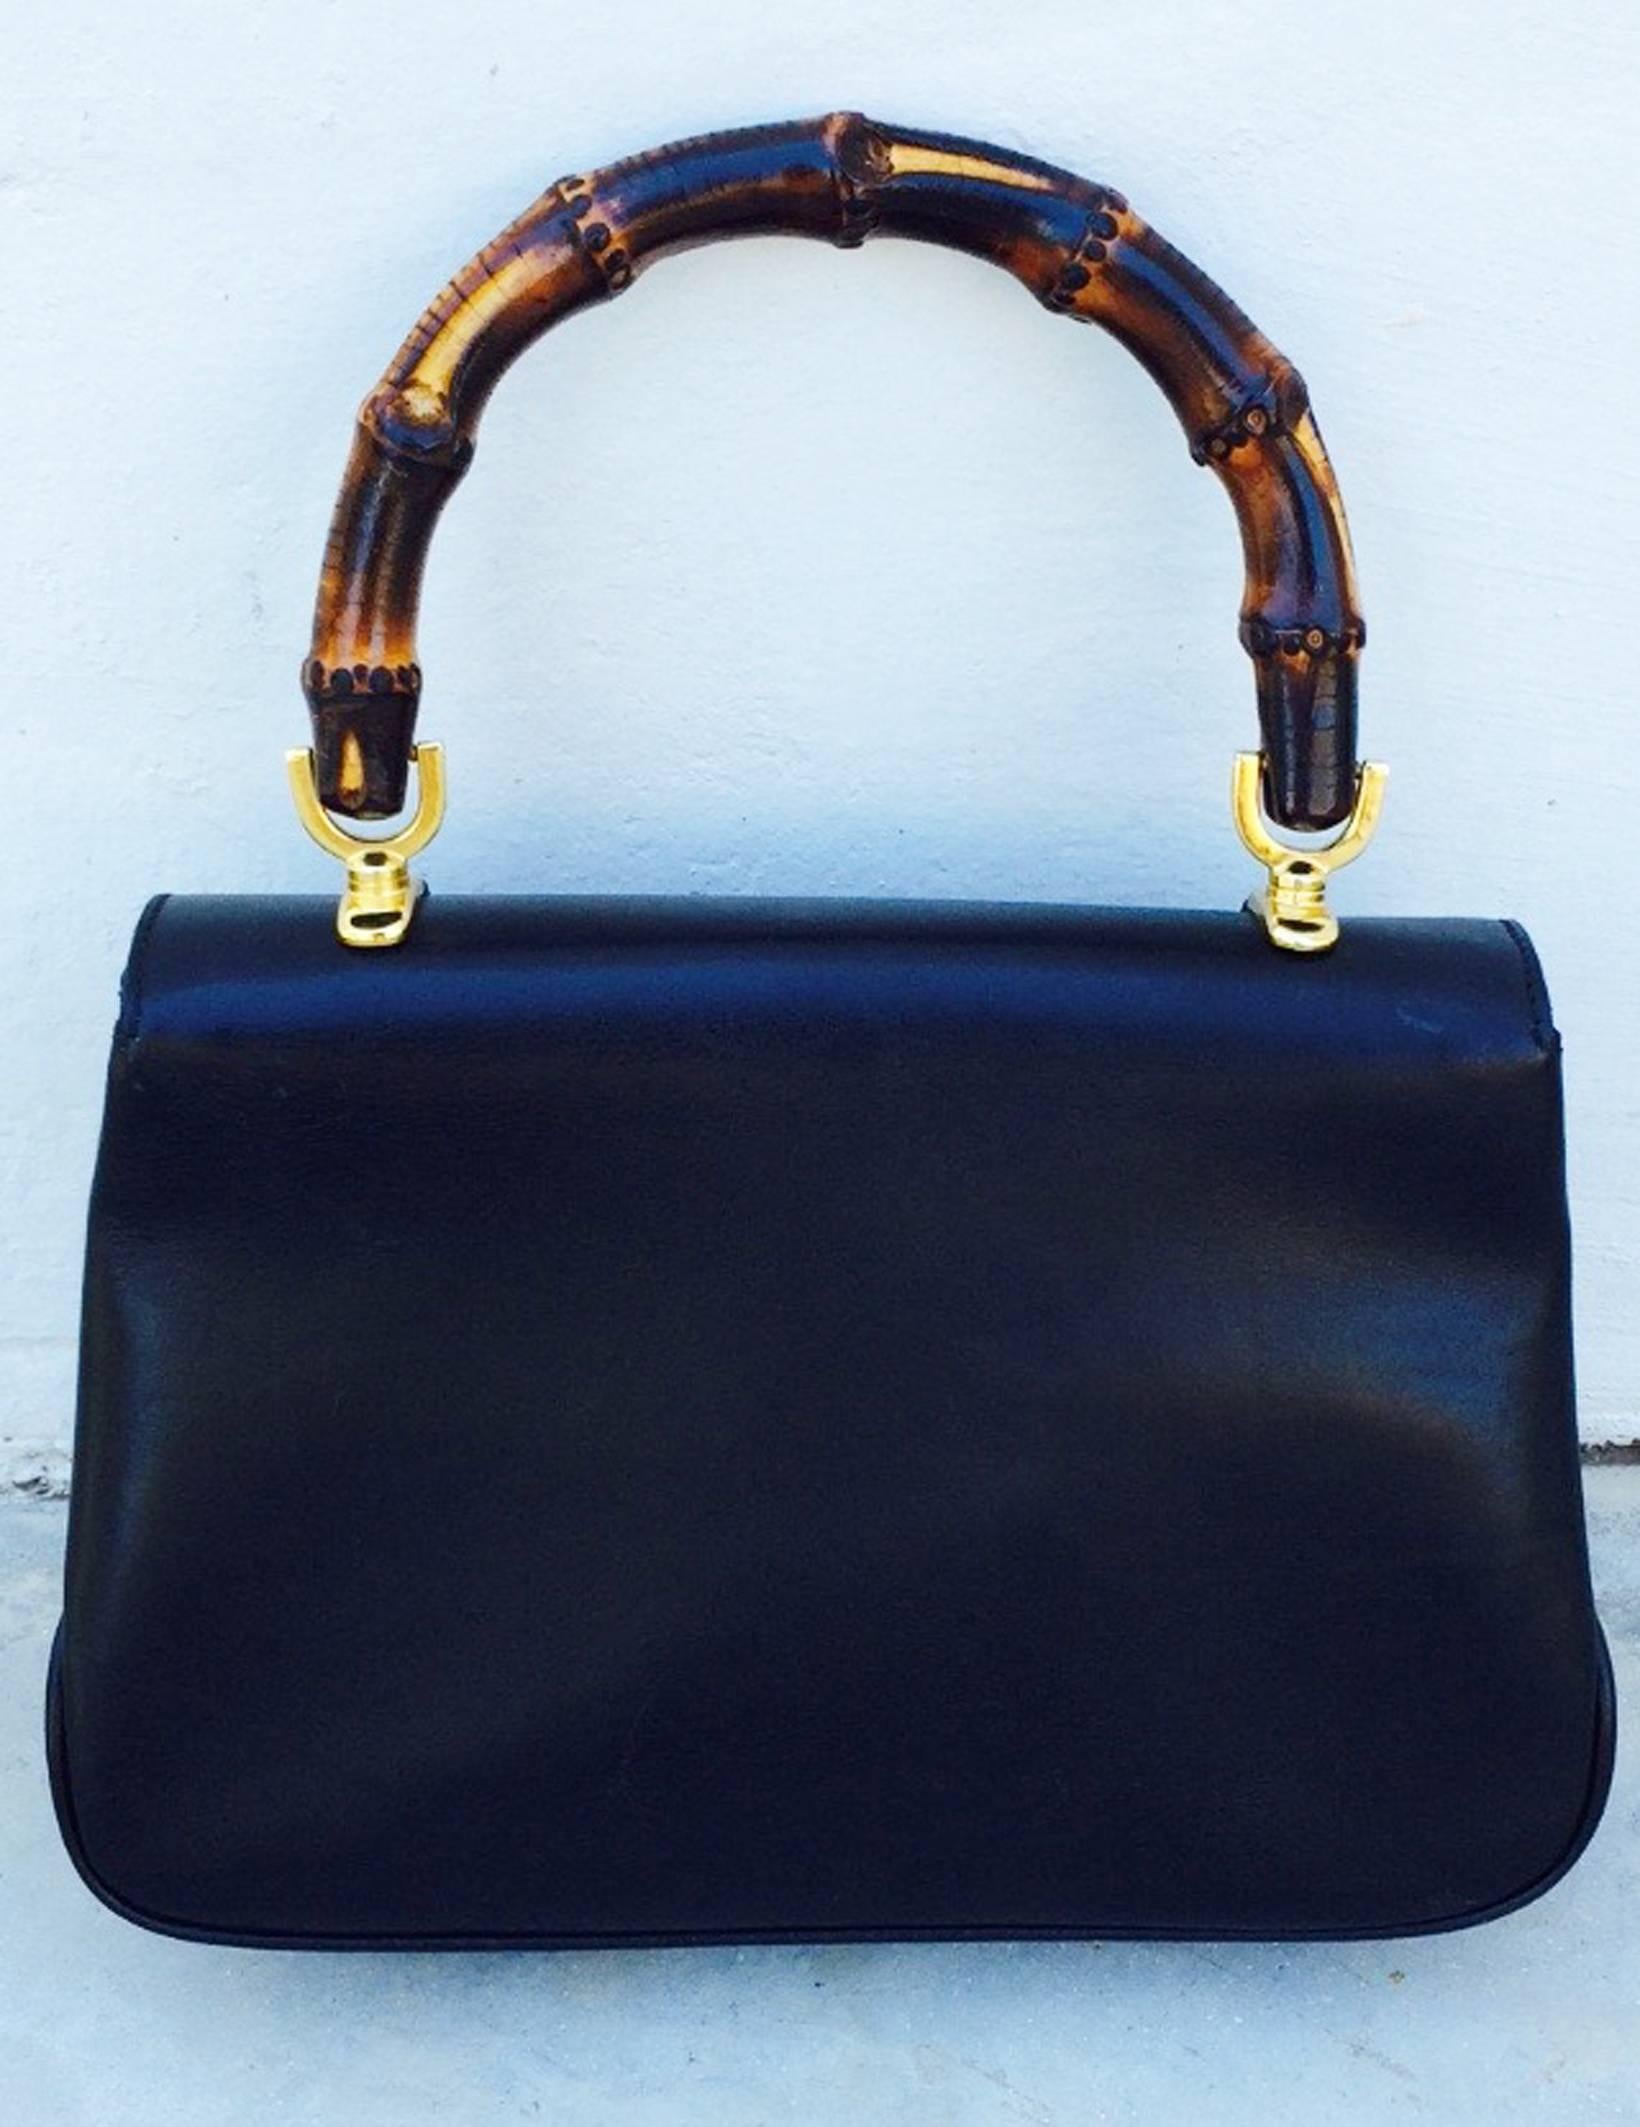 A fine and now iconic bamboo handled Gucci handbag. Authentic sculpted black leather item features a vivid red leather interior with signature zipper pull. Two-tone silver/gold locking closure intact and working properly. Handle includes a 4